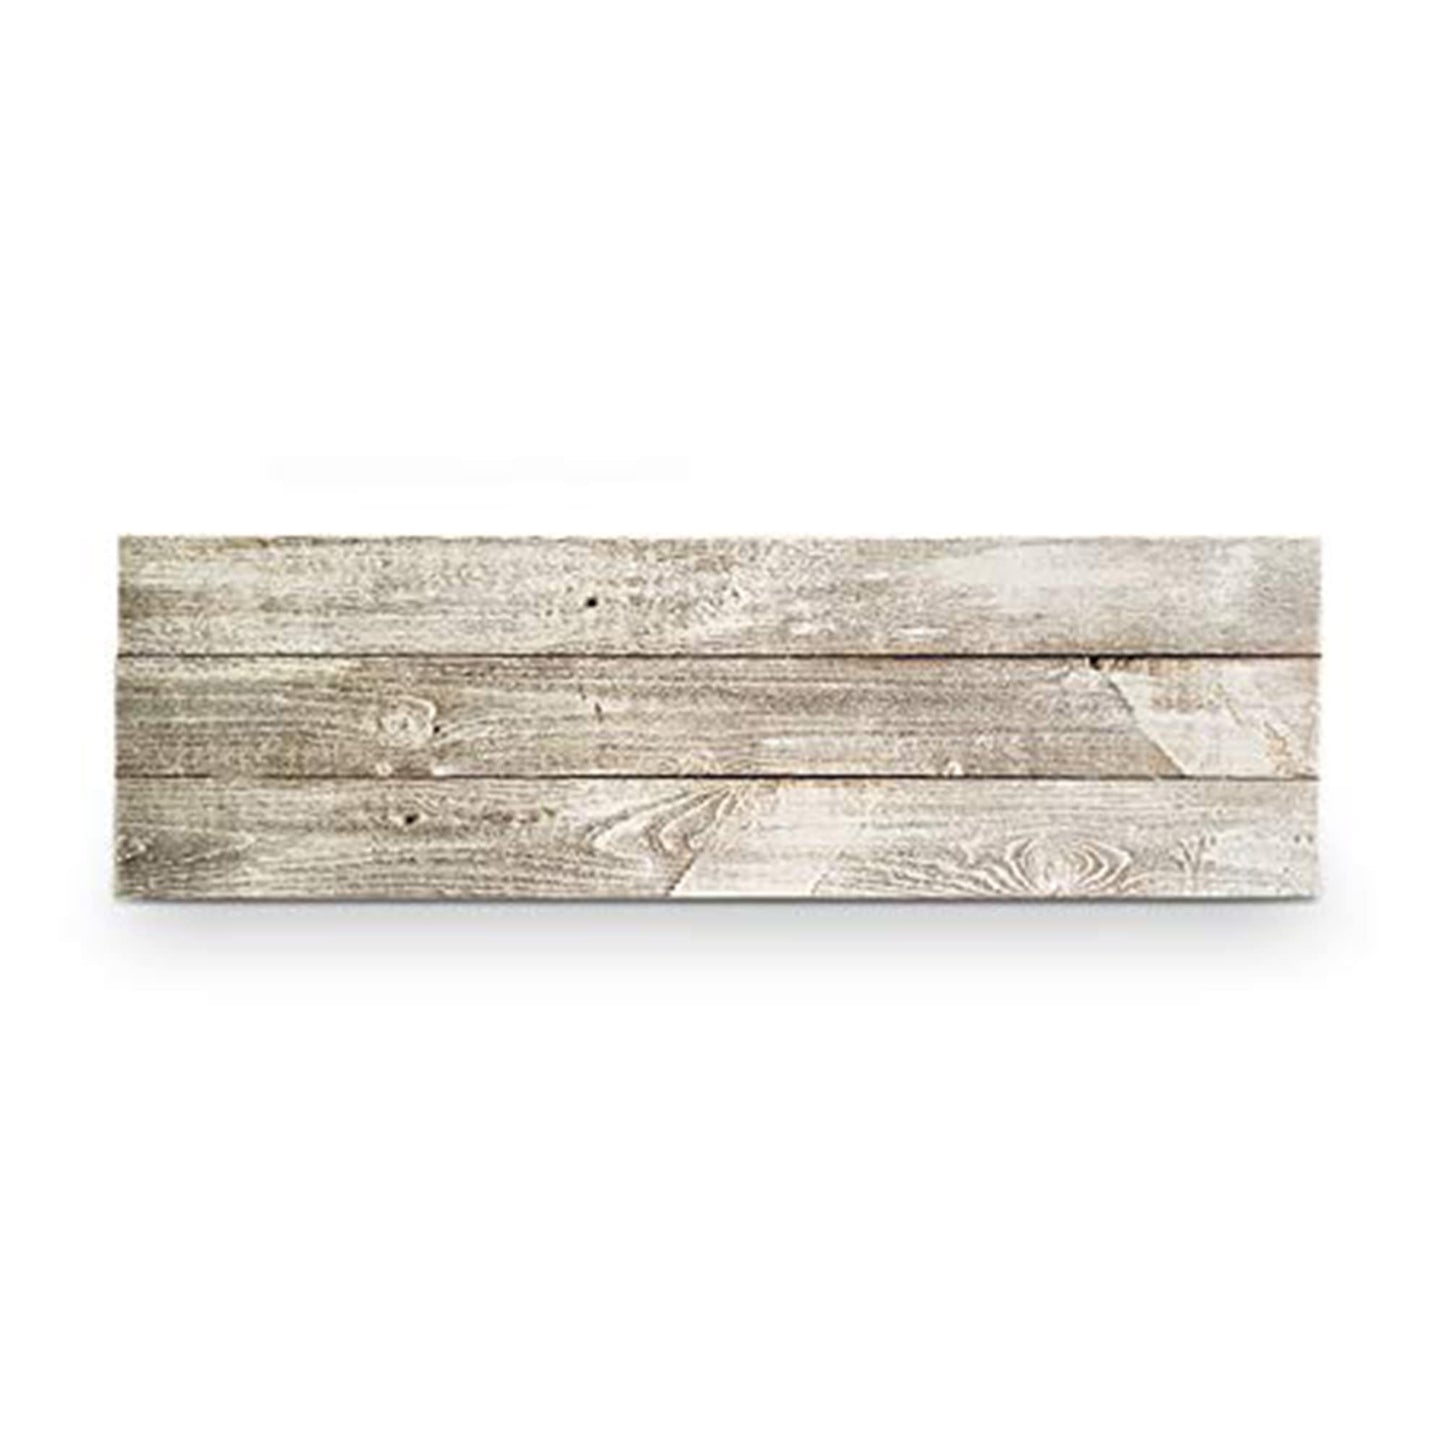 Rockin' Wood 3 Foot DIY Blank Rustic Weathered Reclaimed Natural Wood Sign with Sawtooth Hangers for Door or Porch Decor, Whitewash